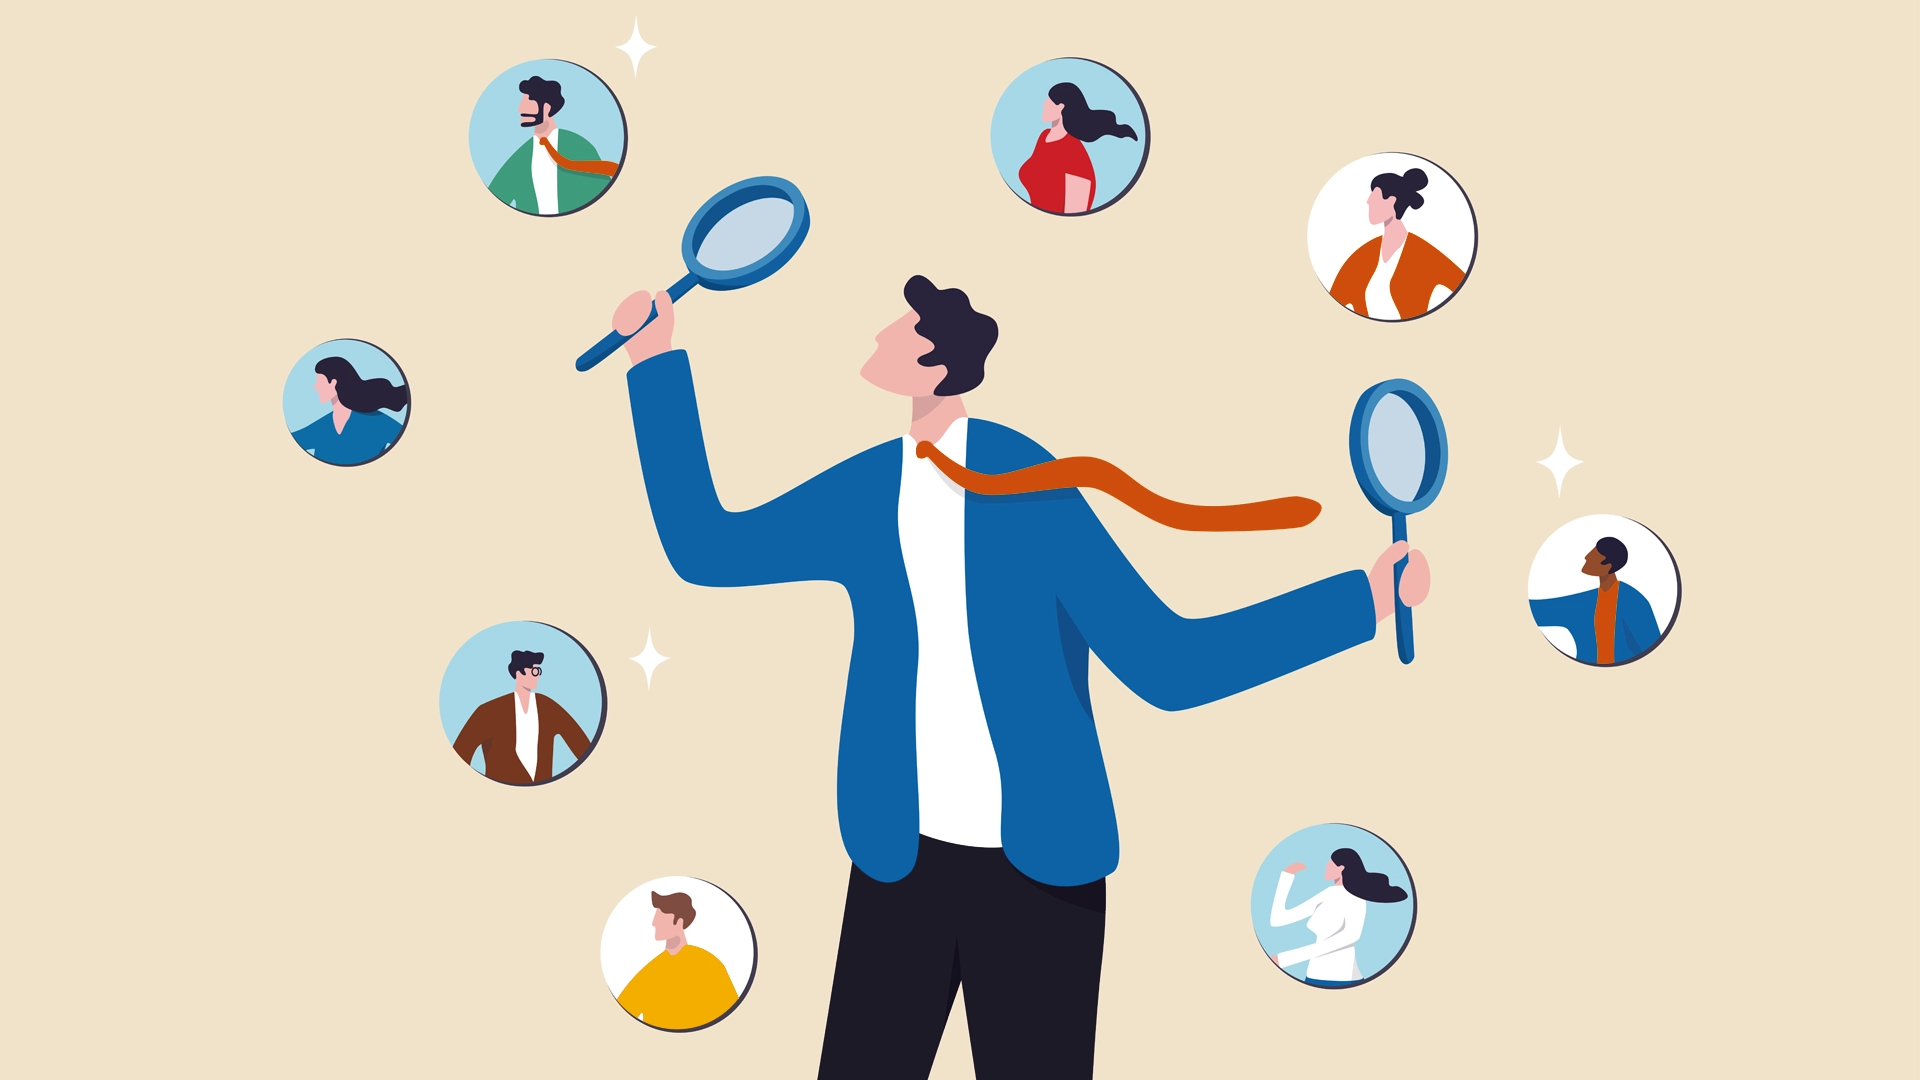 Illustration of person looking at floating heads through magnifying glasses